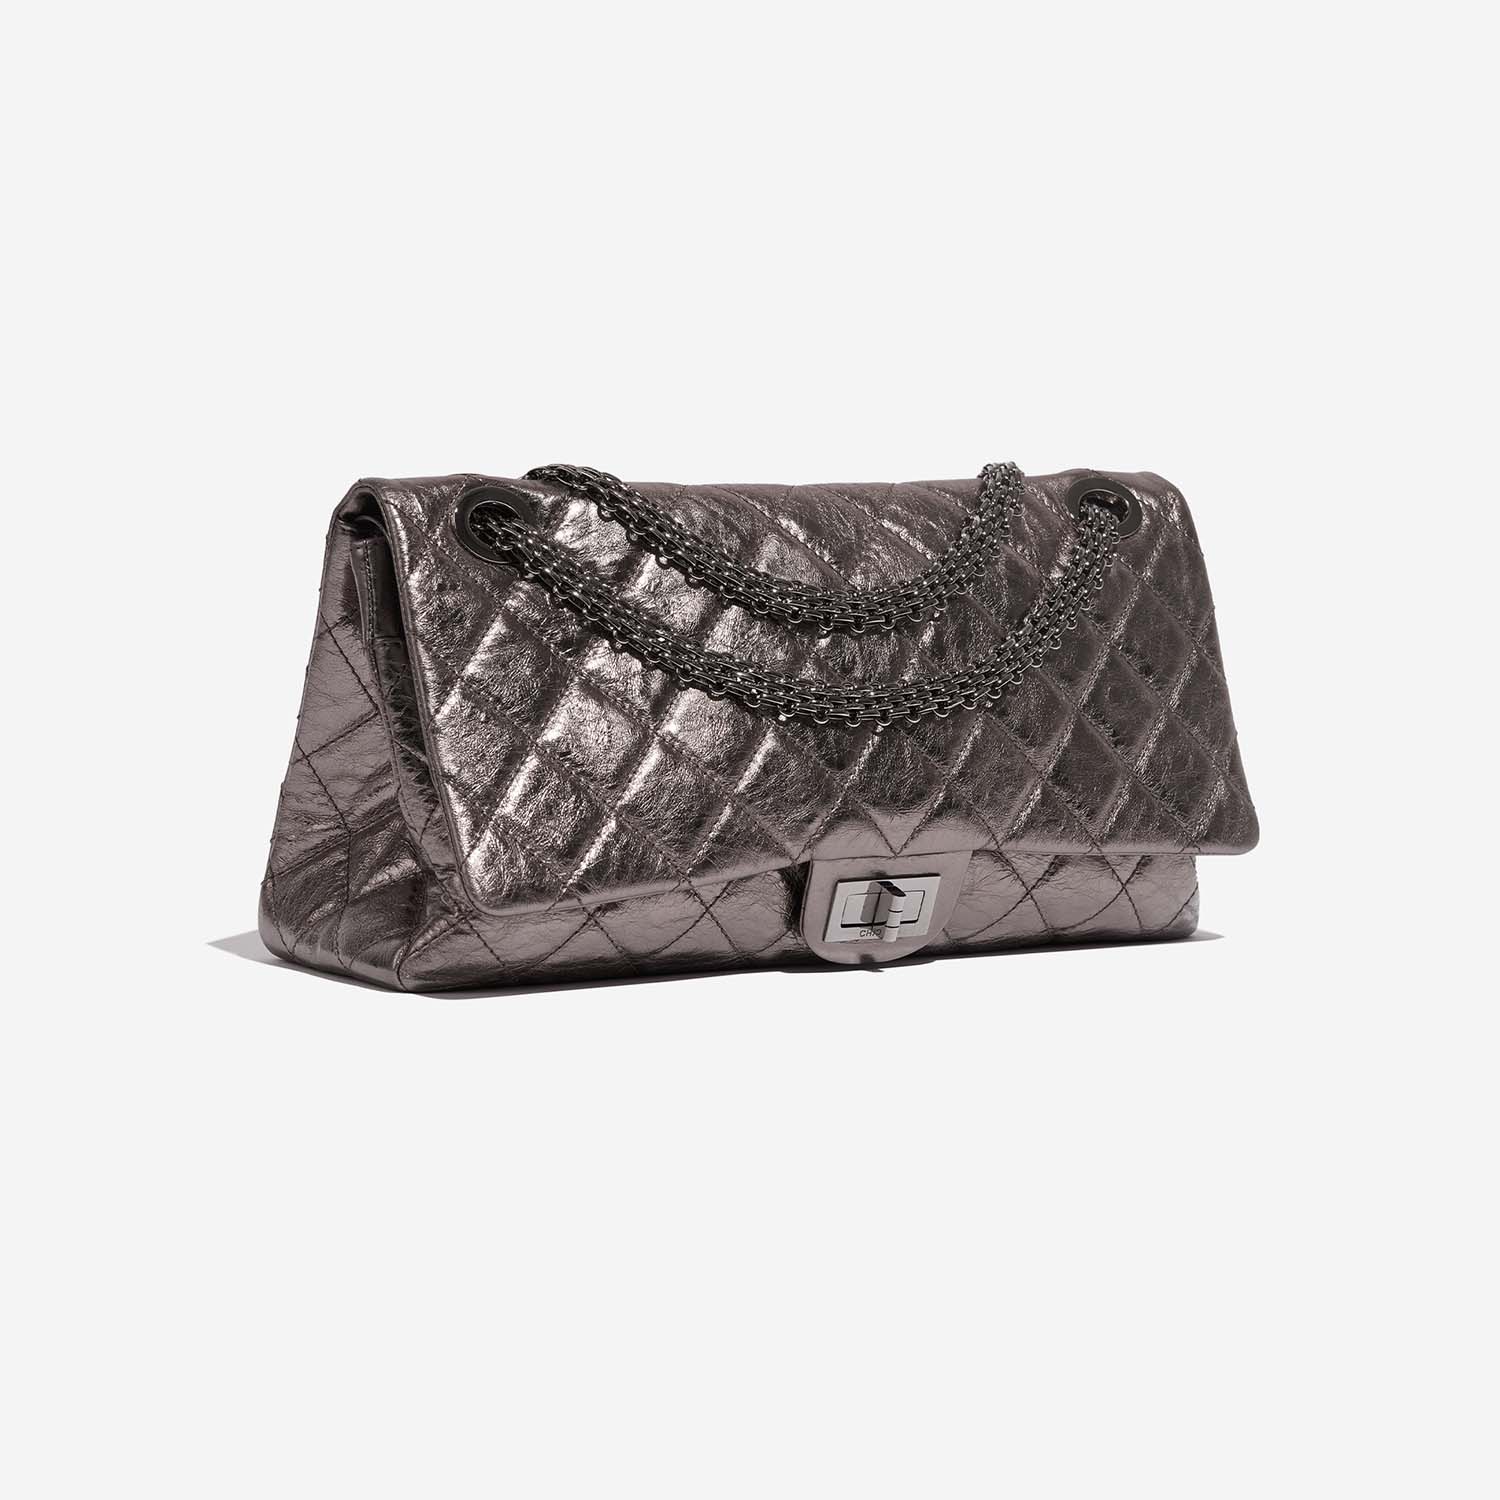 CHANEL Metallic Silver Quilted 2.55 Aged Leather Reissue Double Flap Bag 228  C.2006